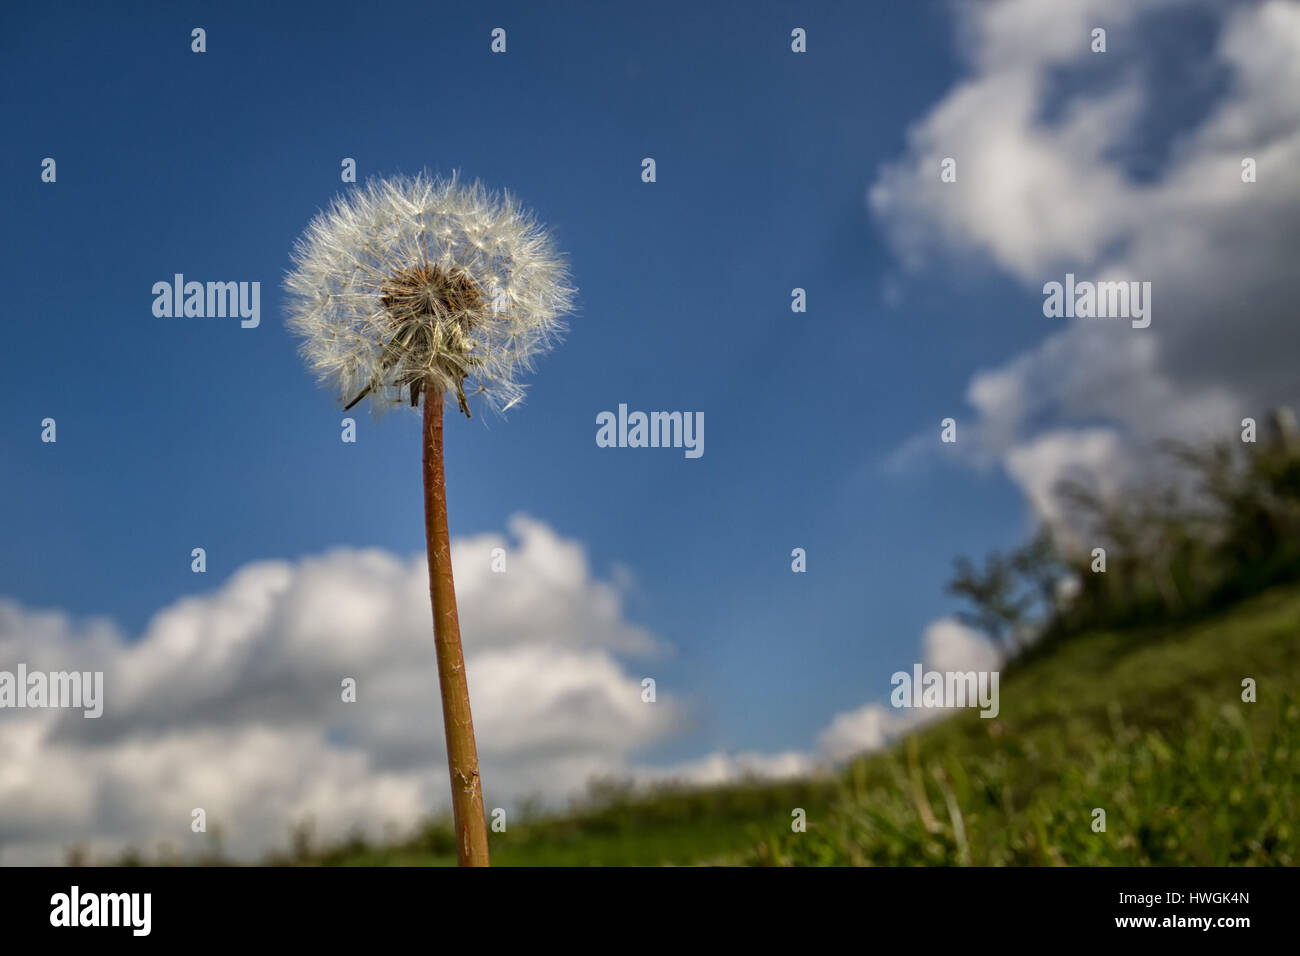 dandelion clock from a low angle looking up set against a blue sky Stock Photo